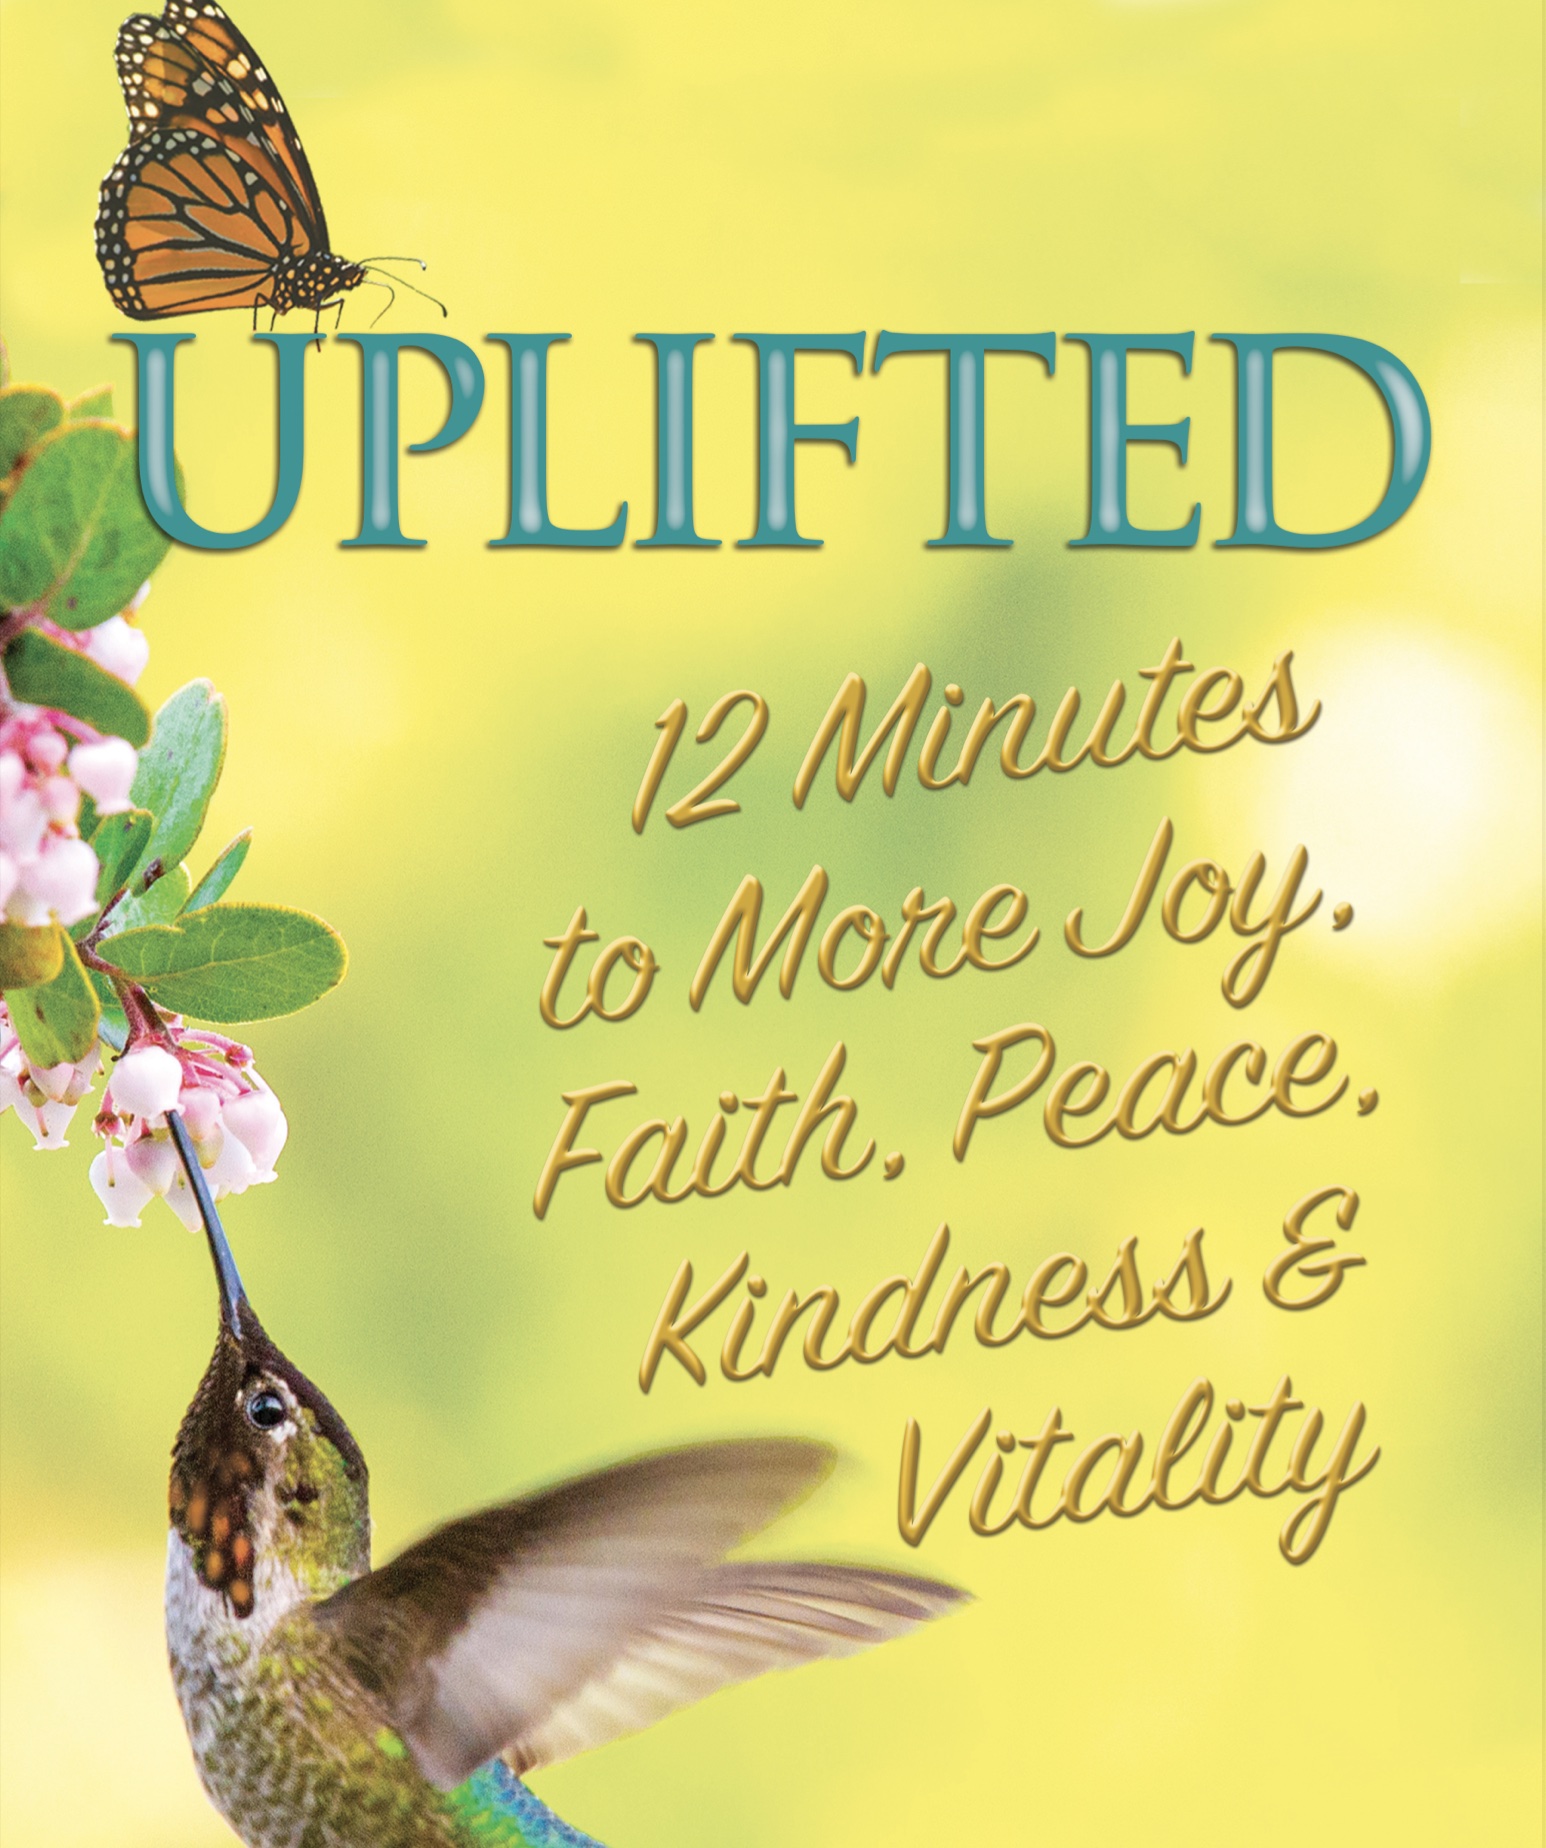 UPLIFTED by Susan Smith Jones